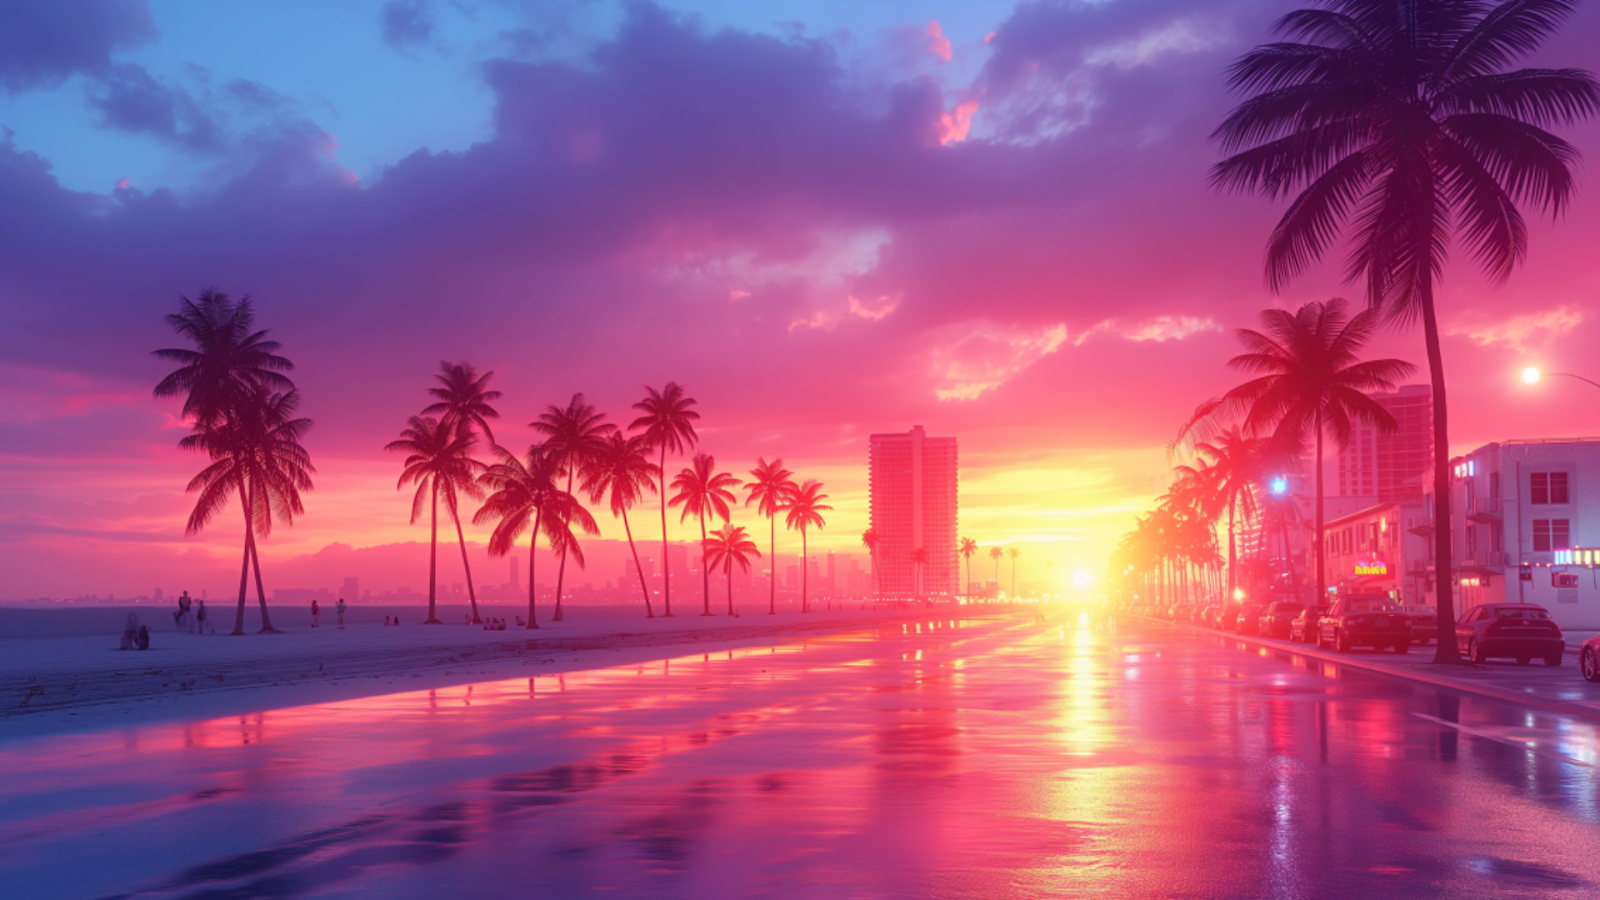 Sunset hues paint the sky over Miami Beach, framed by silhouettes of palm trees